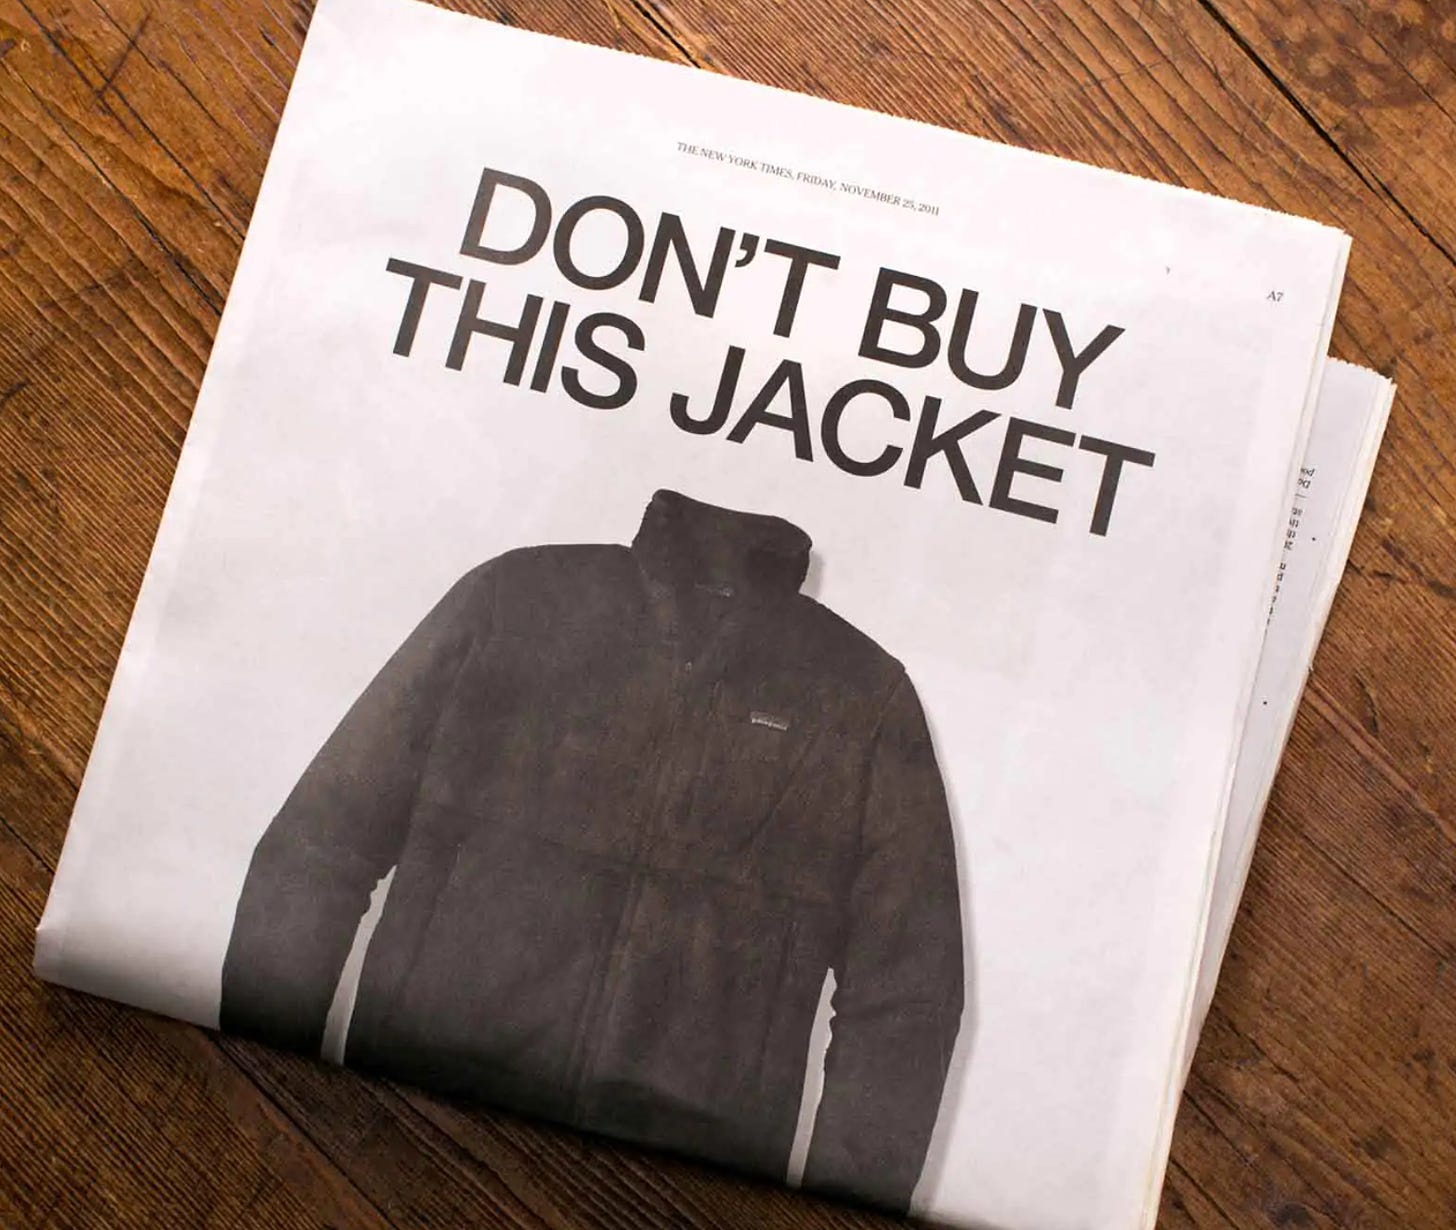 print edition of new york times with full page ad big letters saying don't buy this jacket